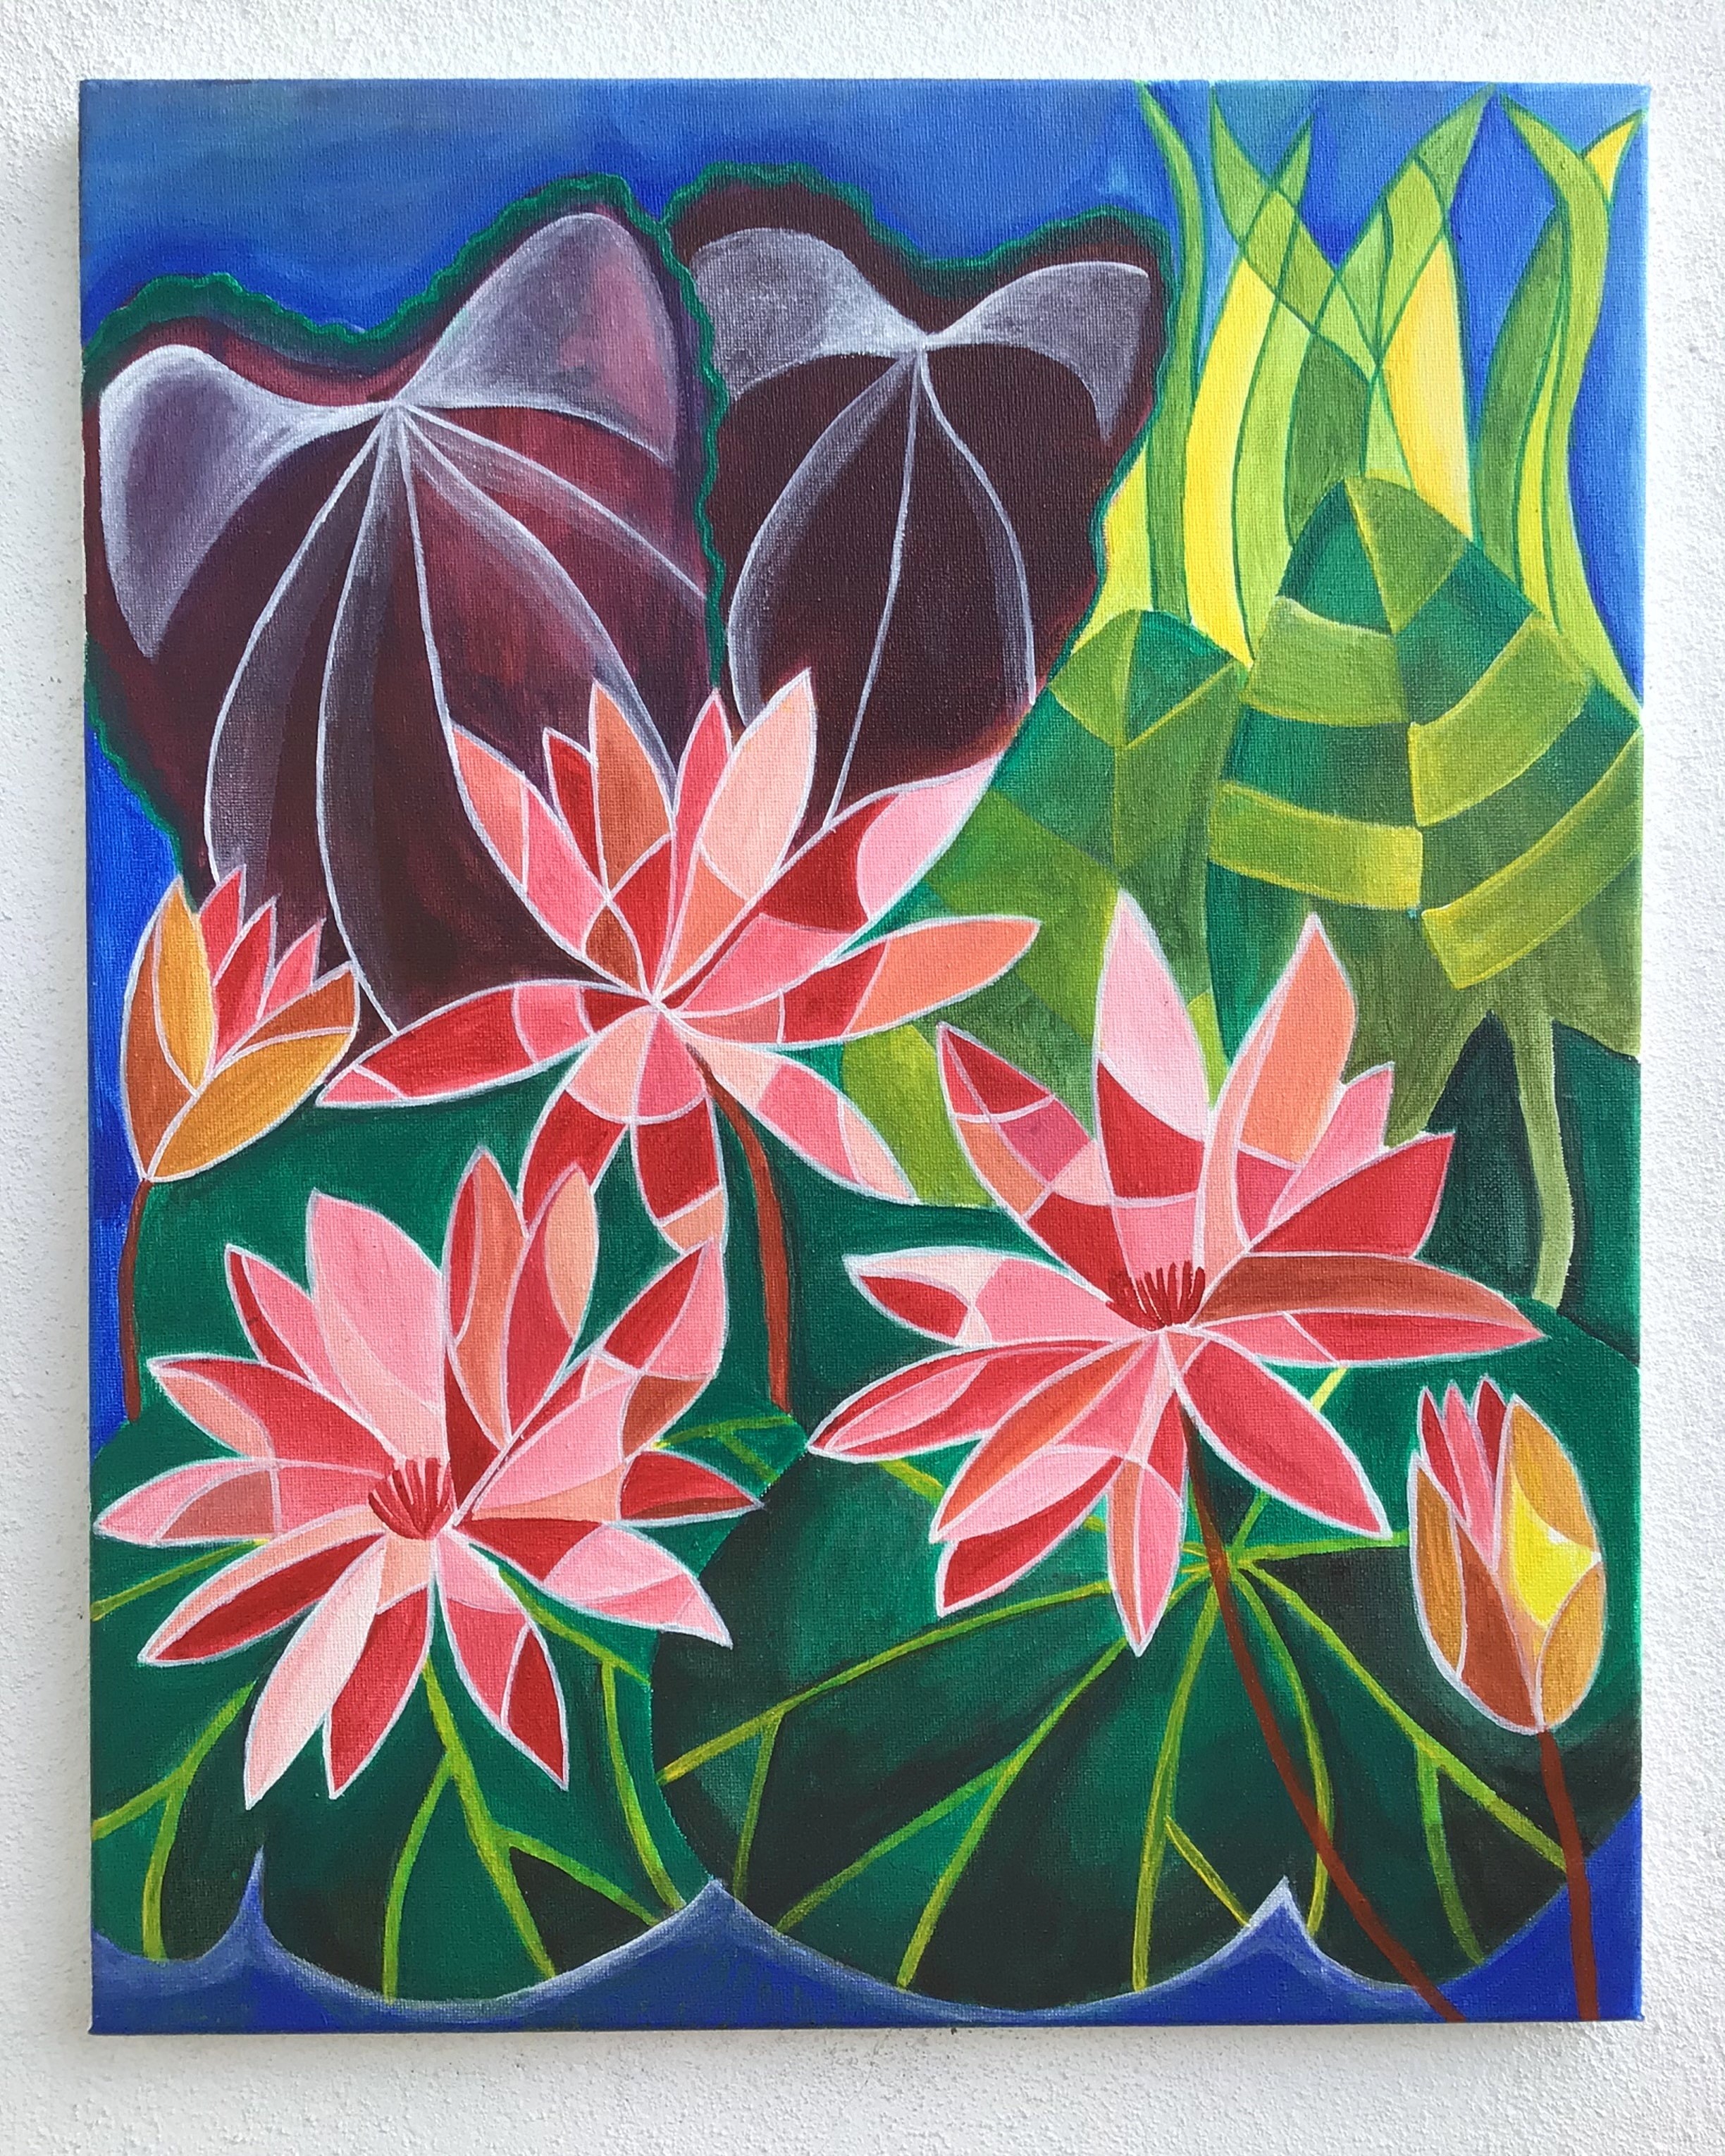 WATER LILIES by Manthi Subasinghe